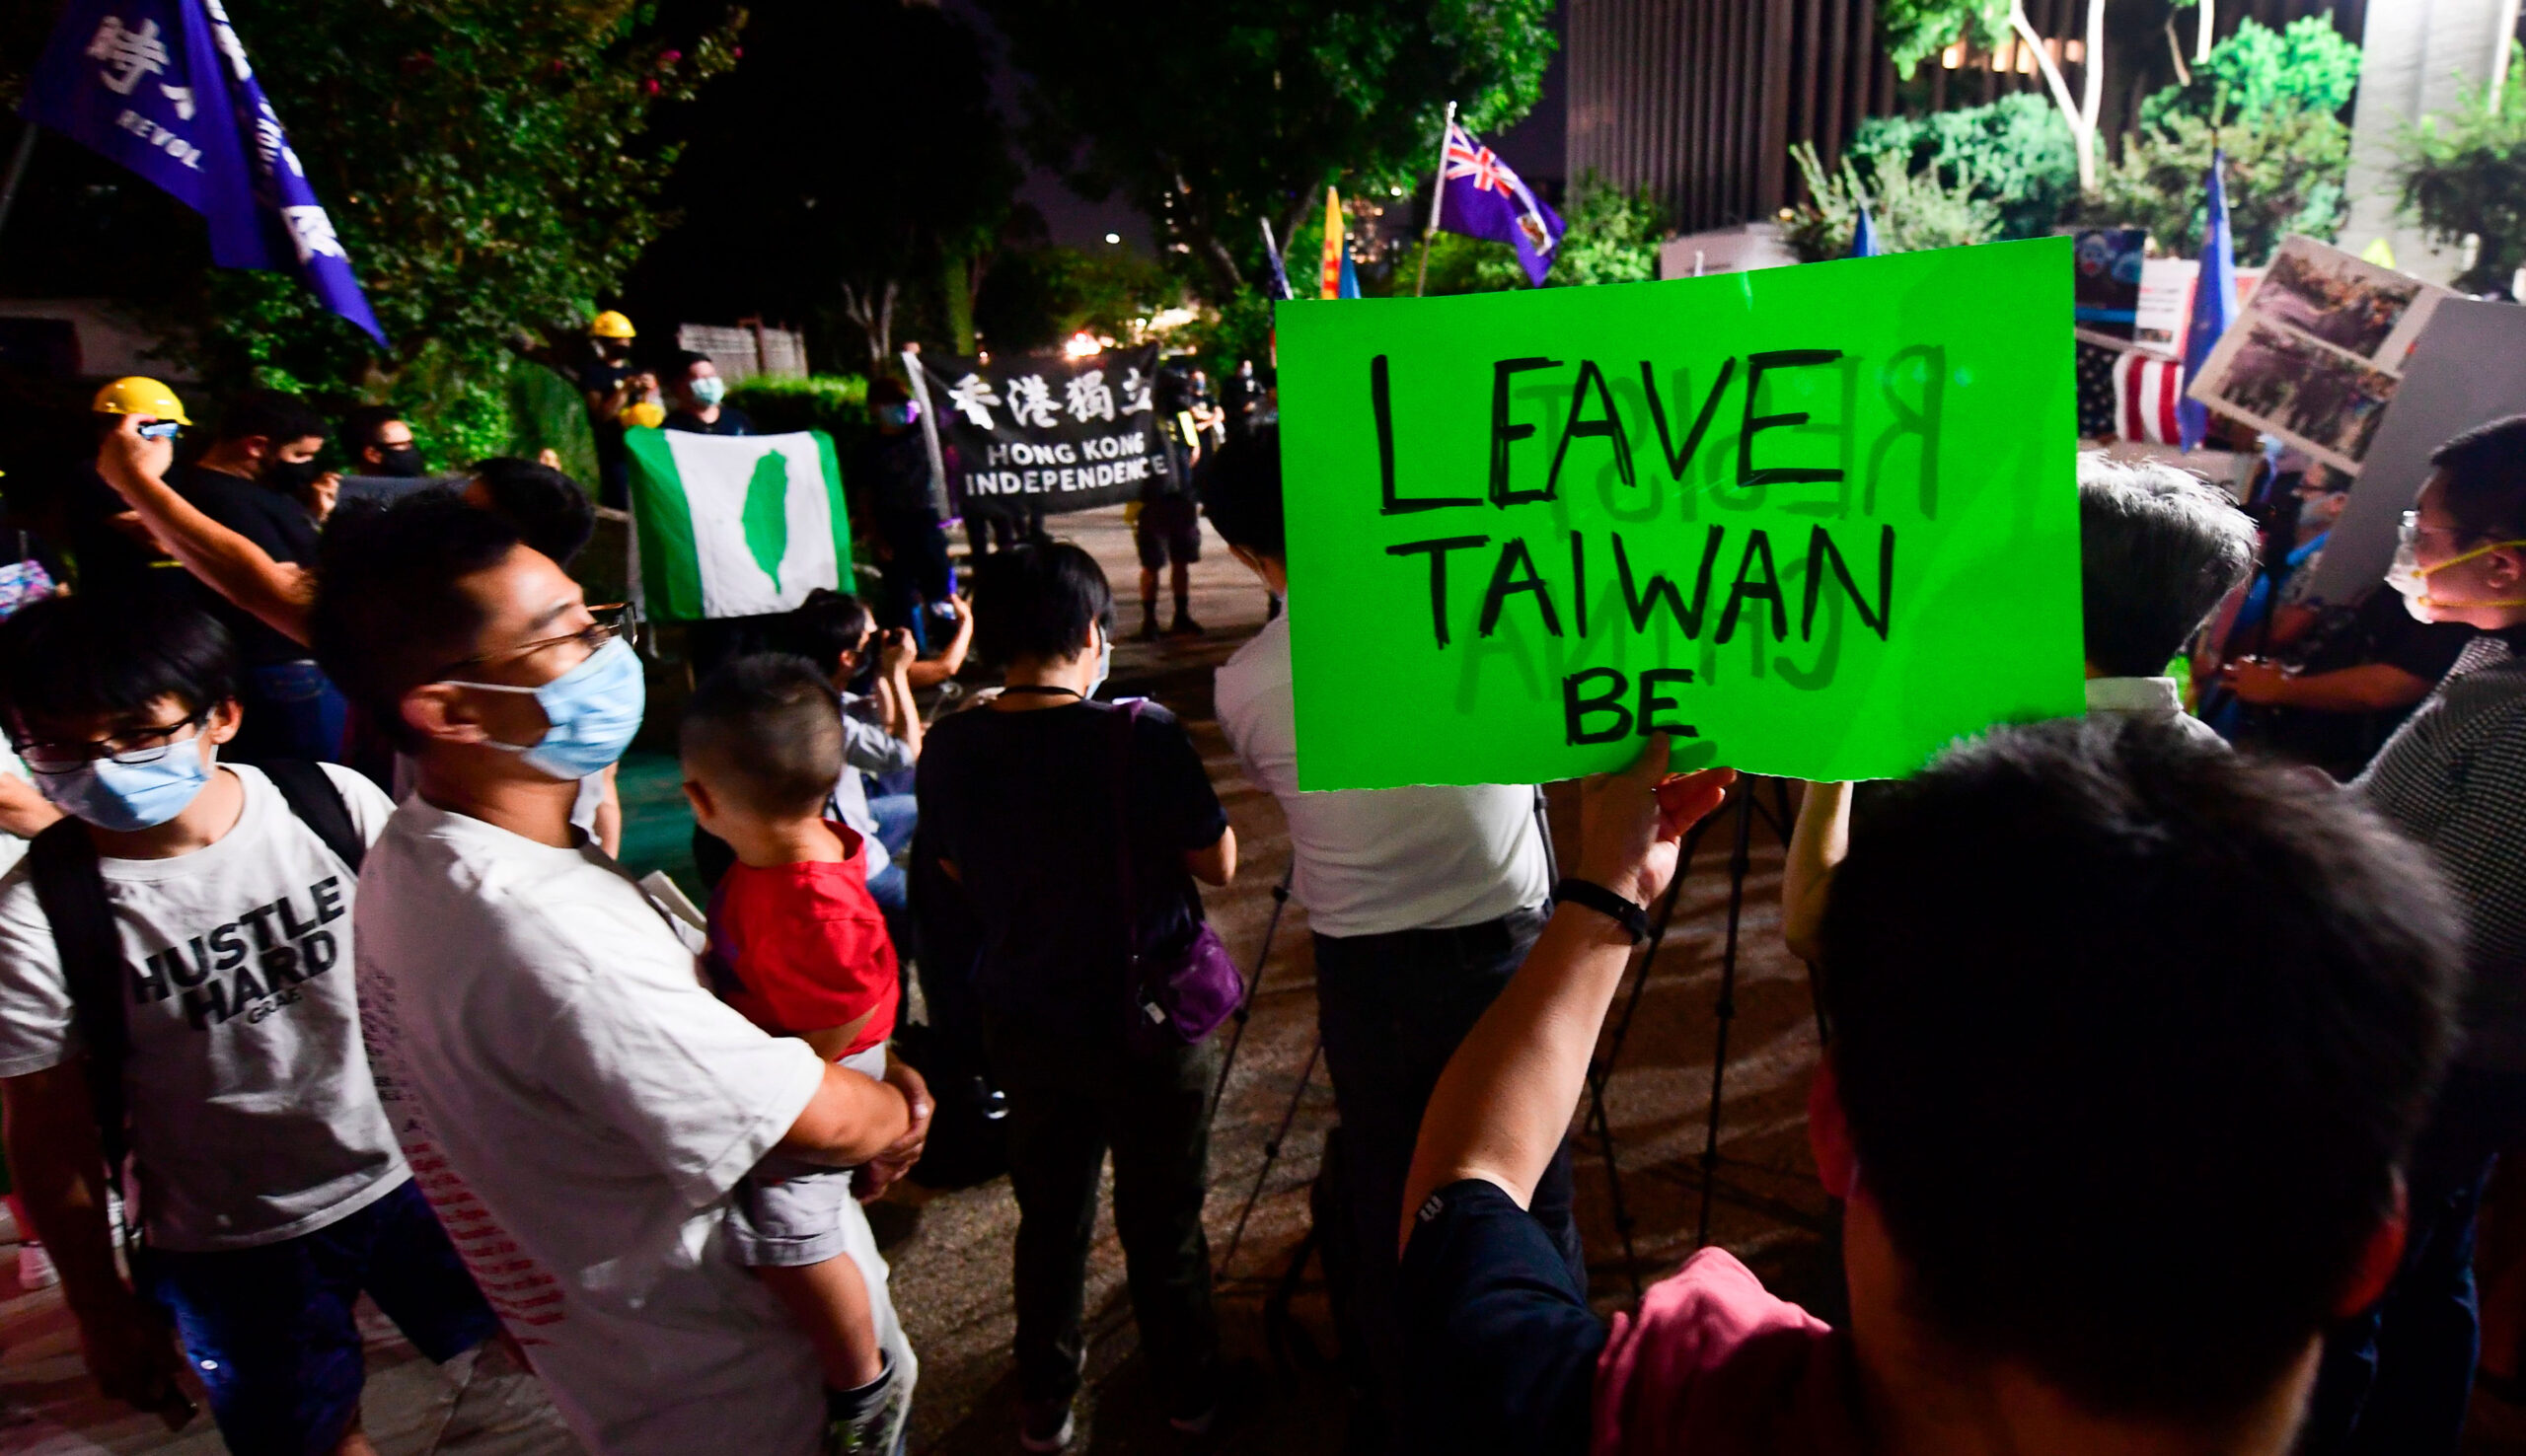 US Isn’t Alone in Support of Taiwan